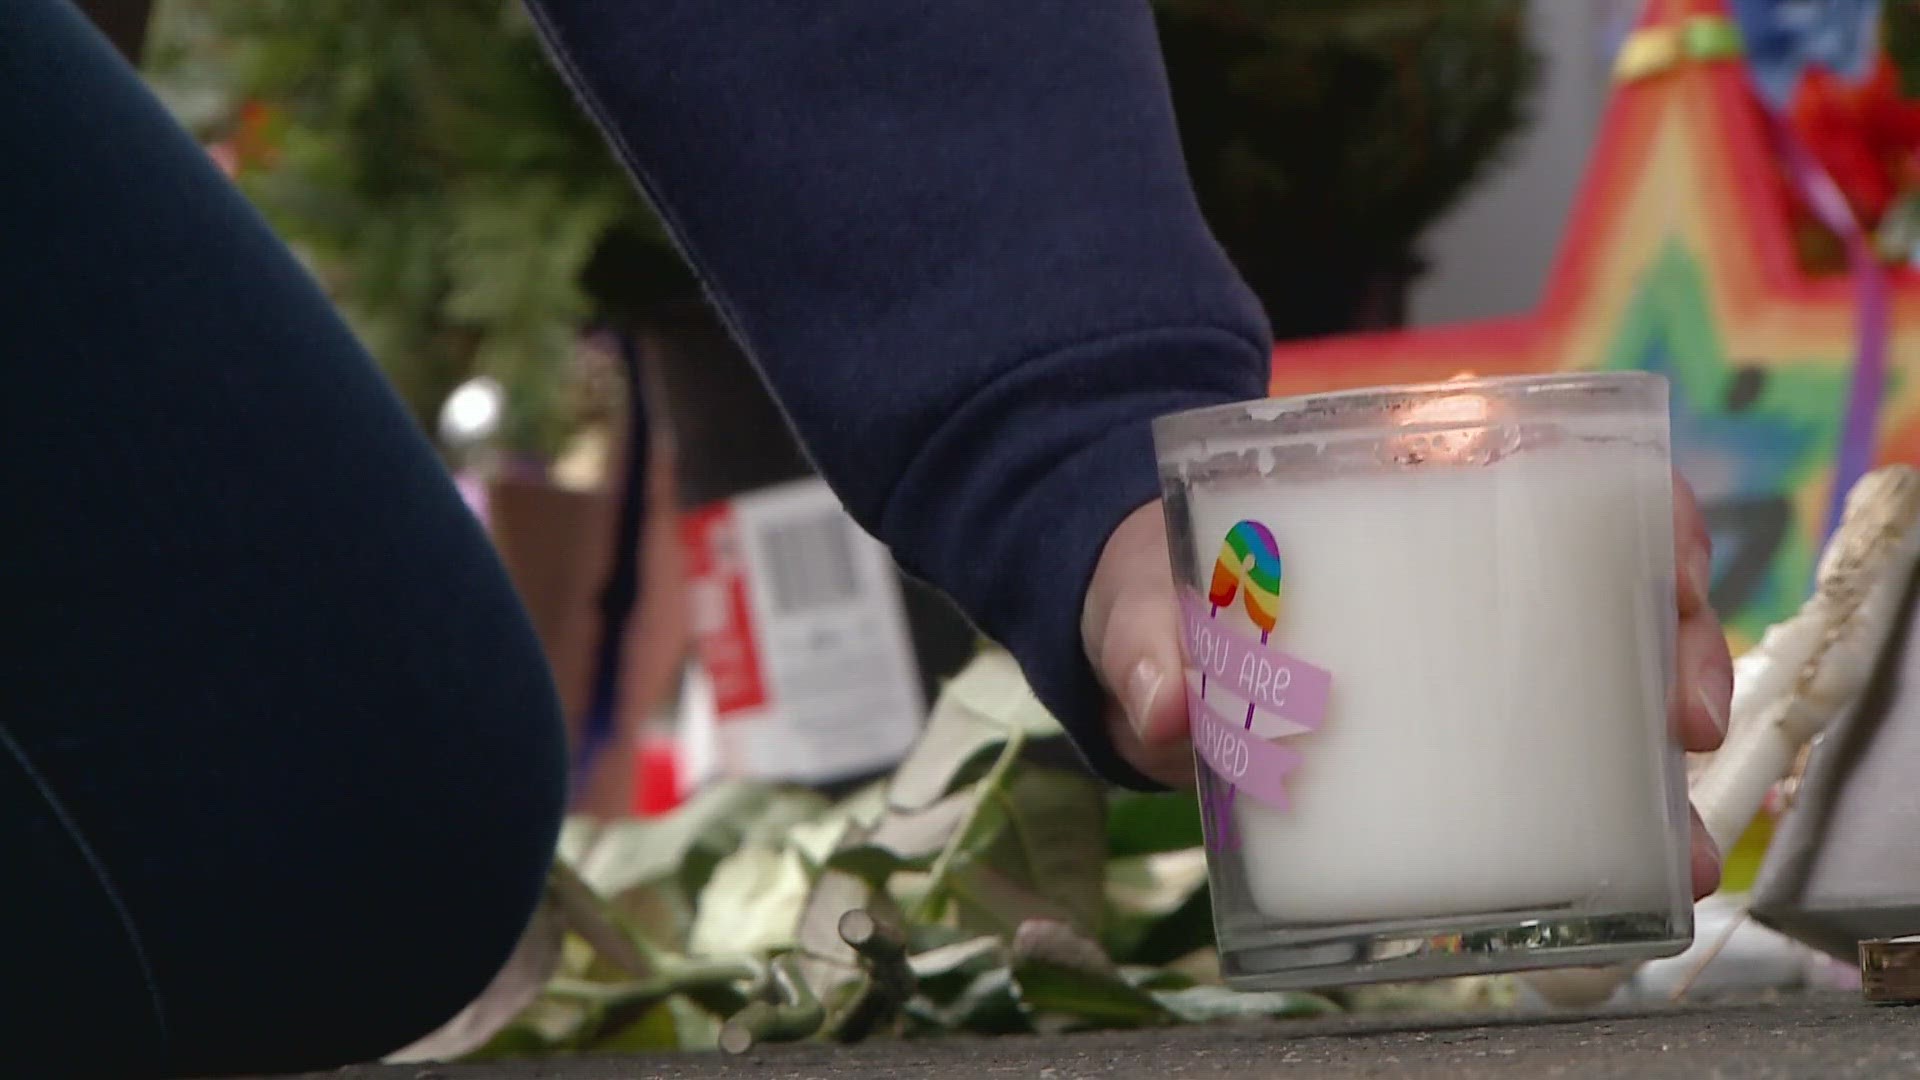 Survivors, families of victims, community leaders and many others gathered outside Club Q Sunday to remember the victims of the shooting there one year ago.